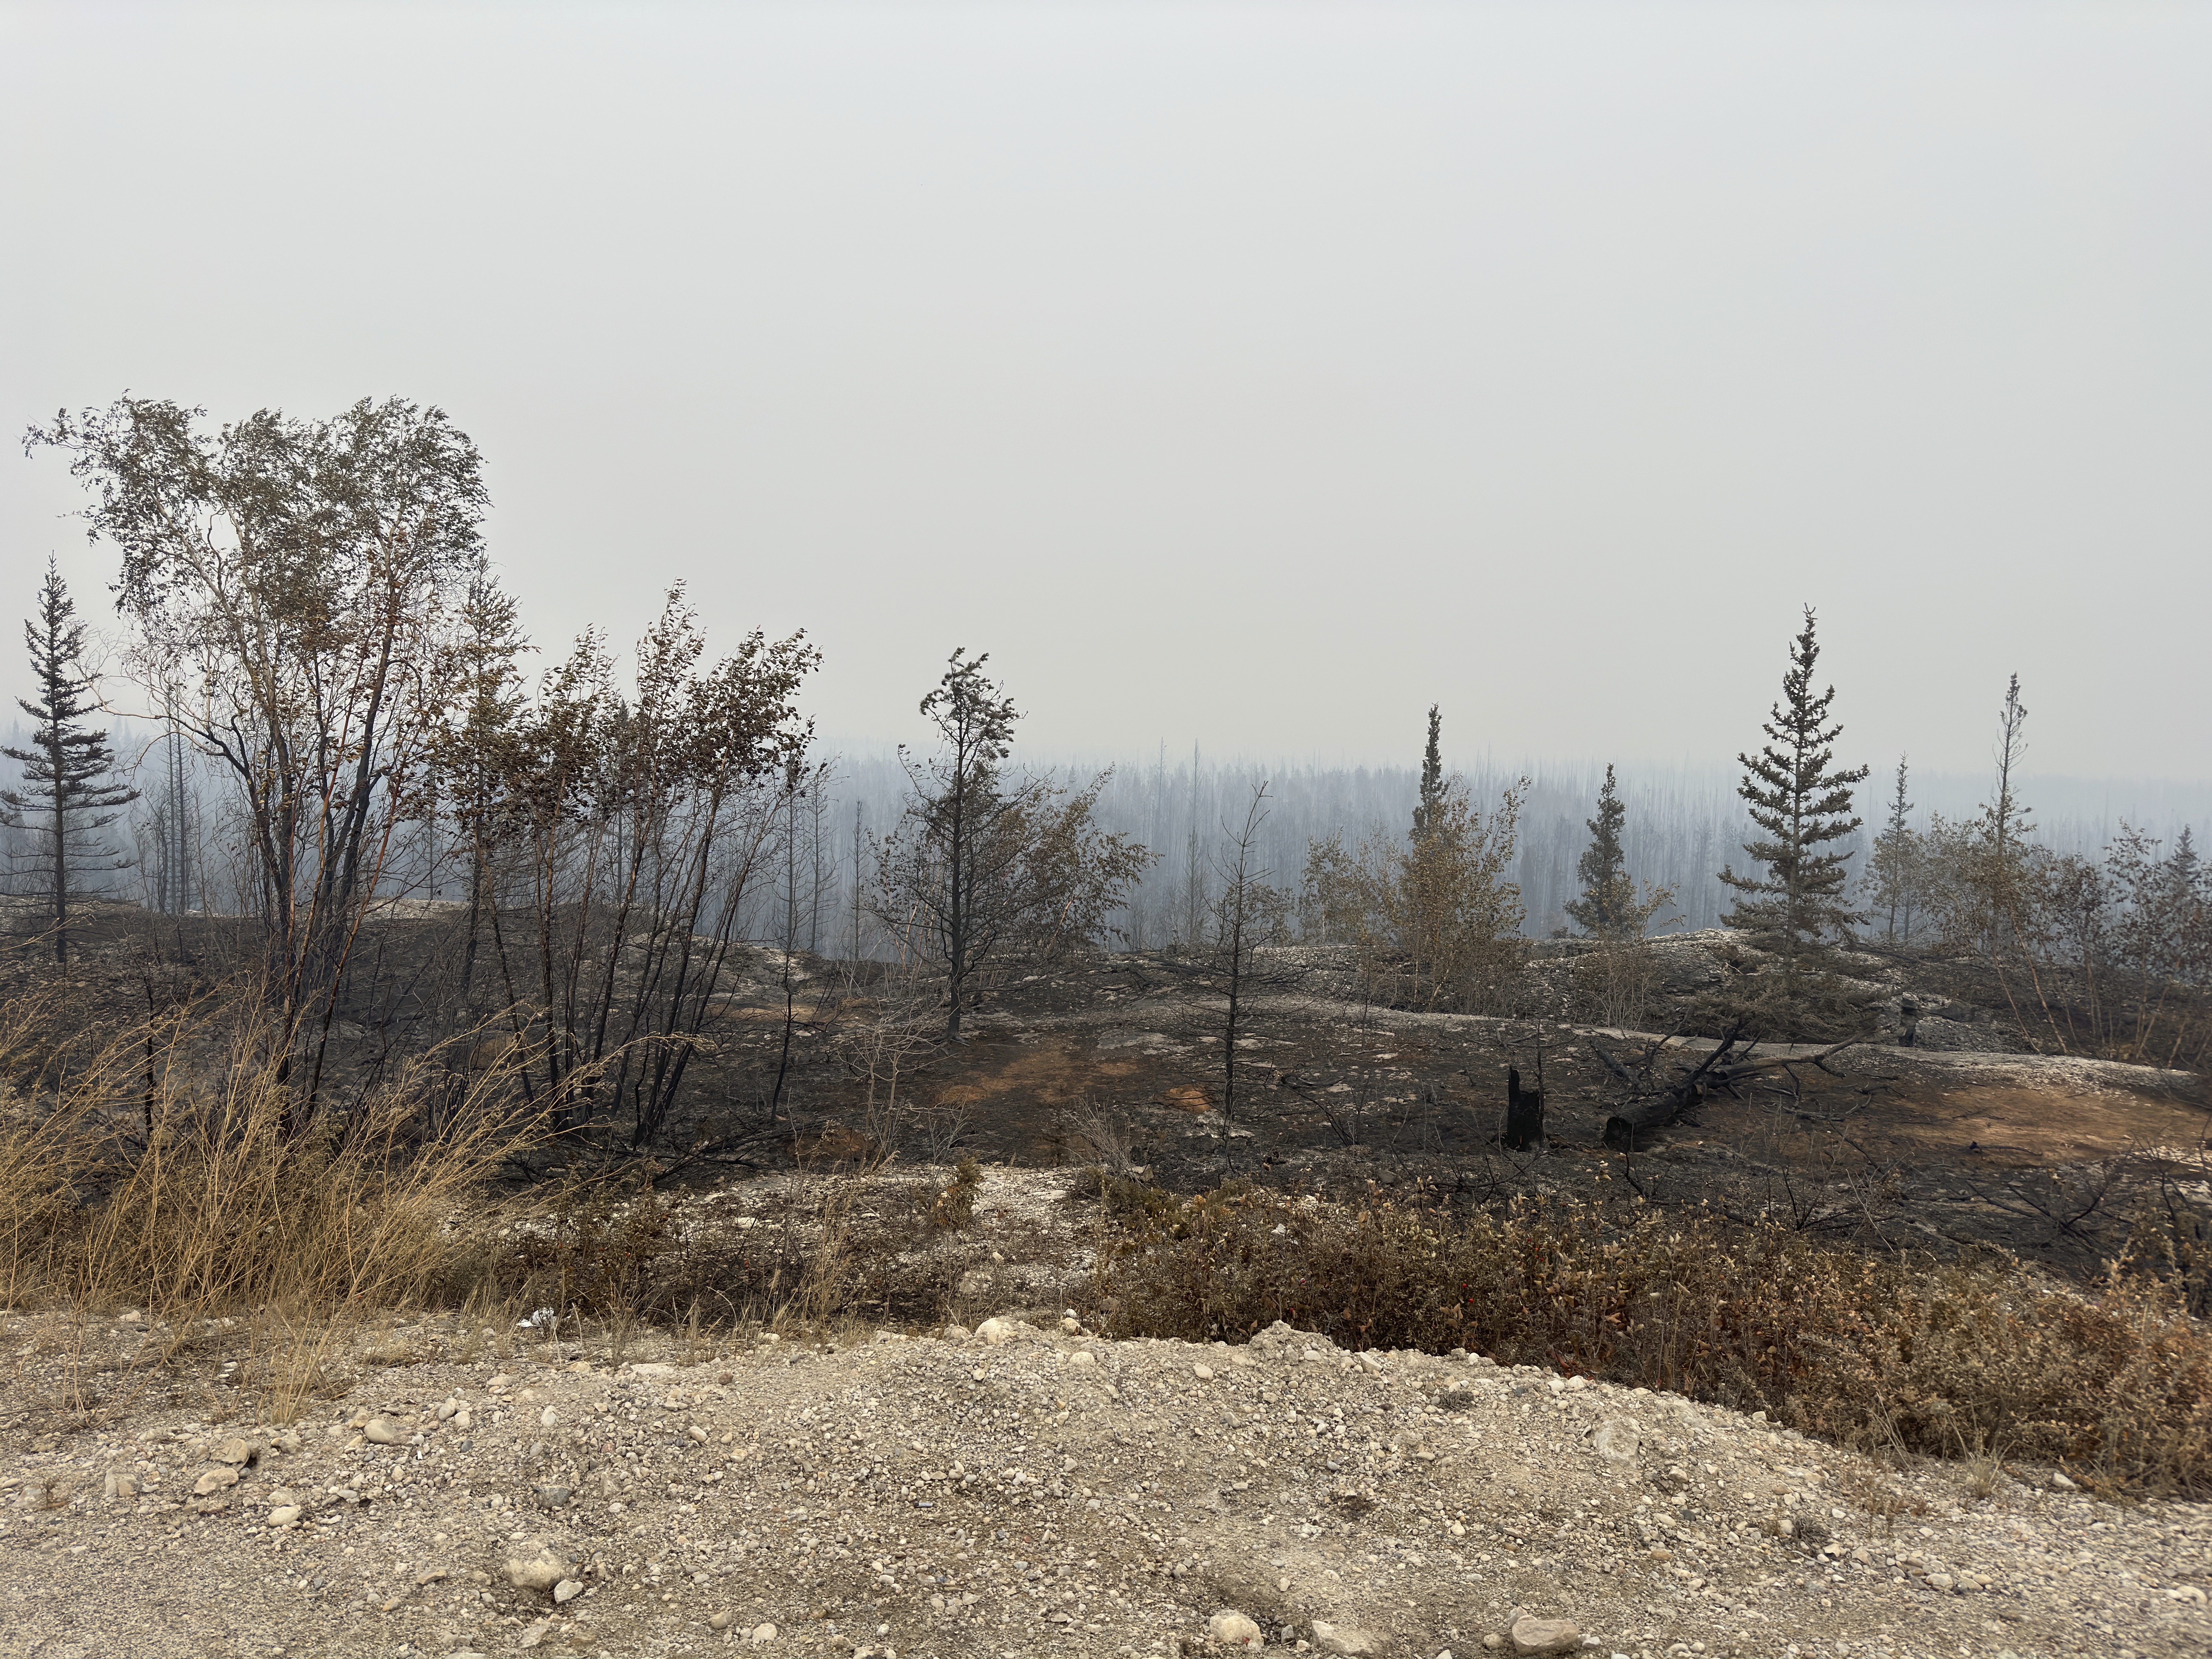 N.W.T. says plan for post-fire returns ready but it’s ‘not time’